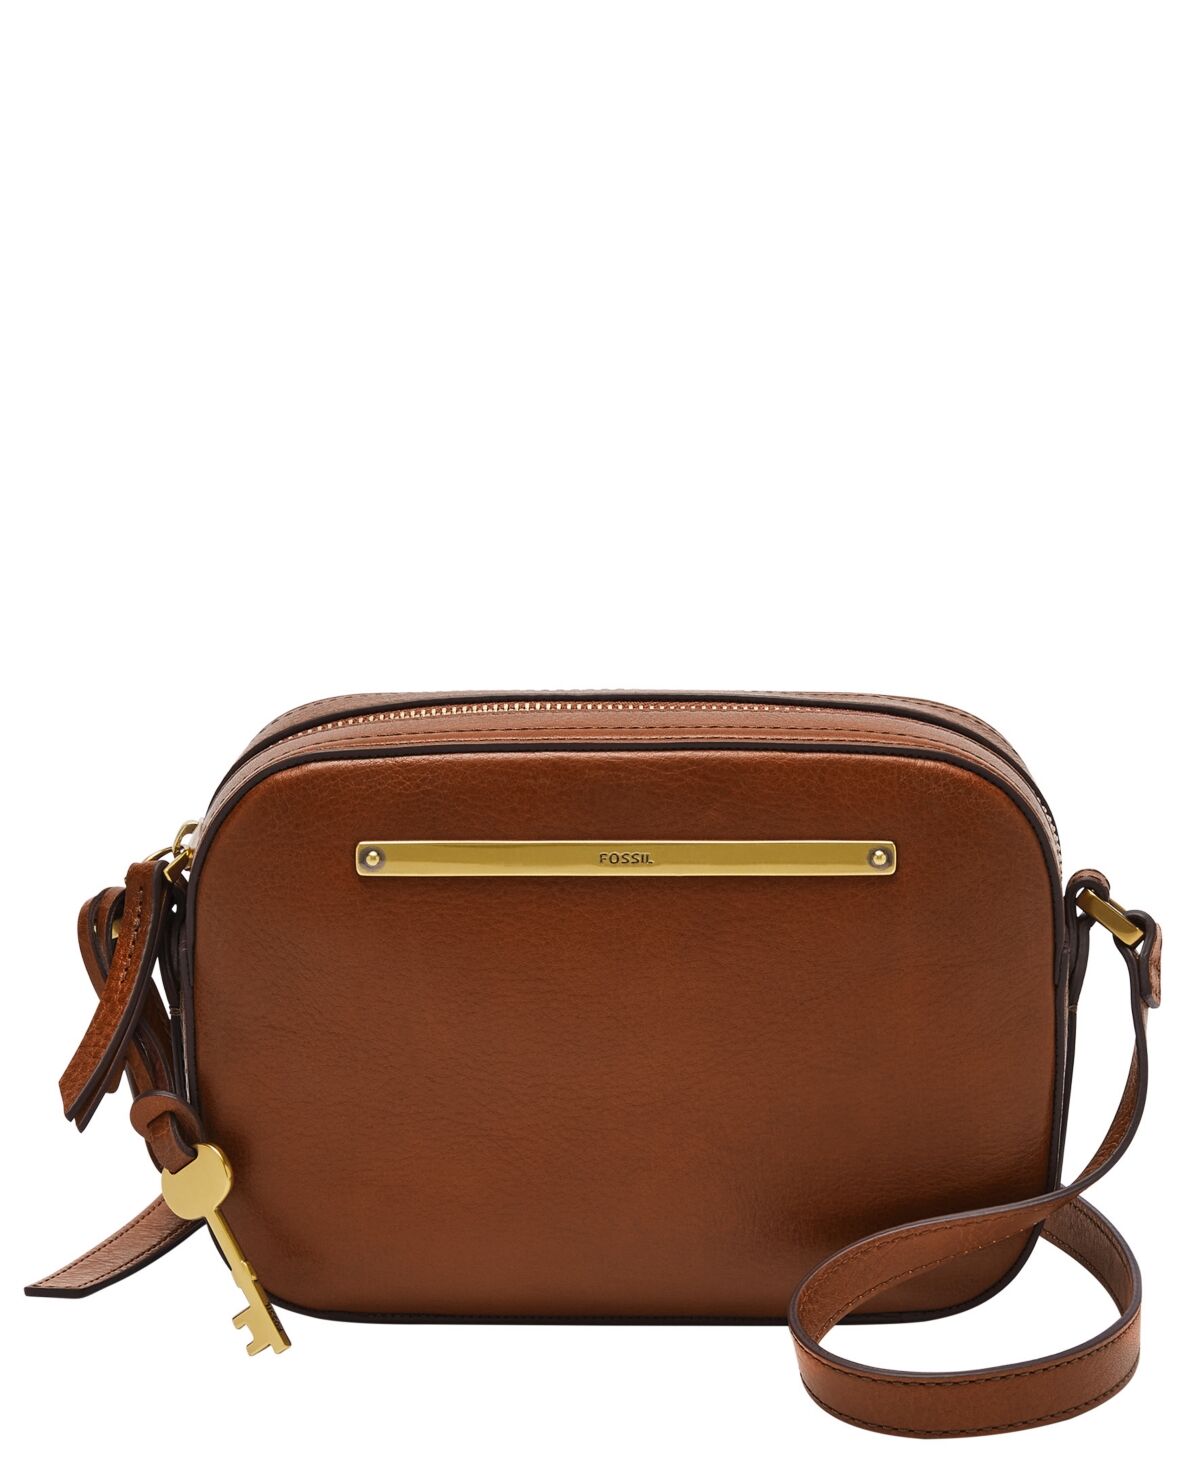 Fossil Liza Leather Camera Bag - Brown